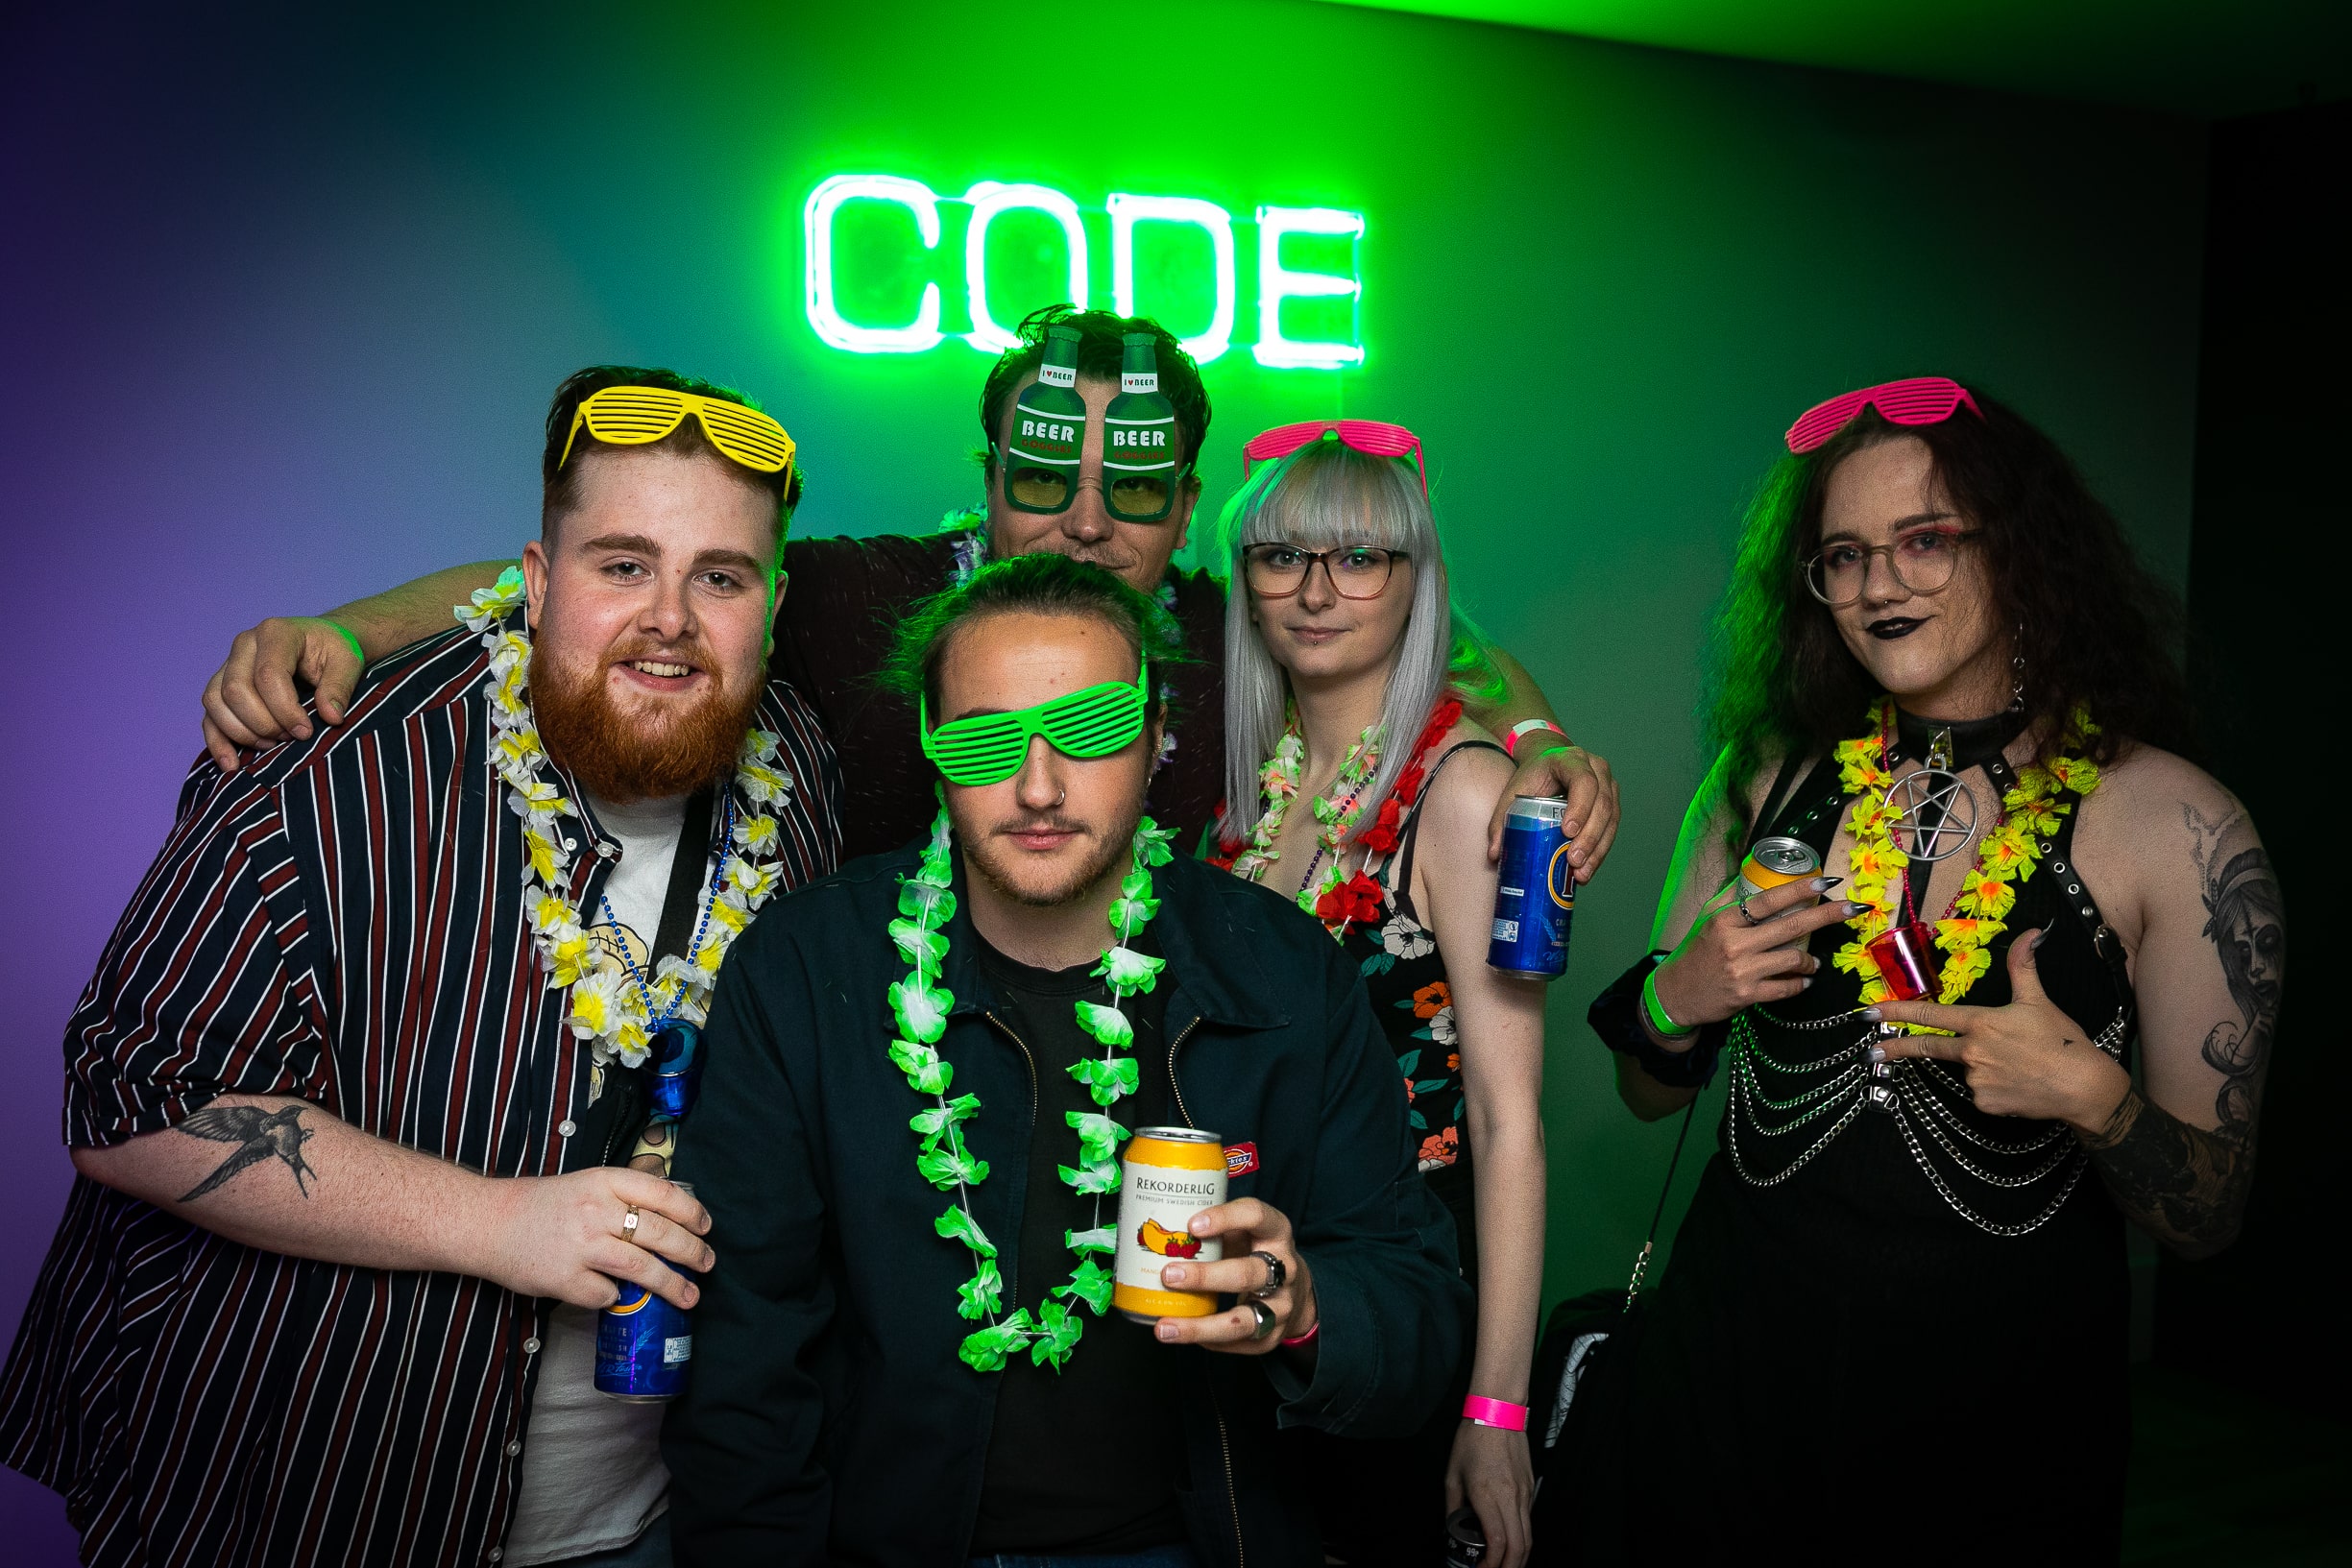 Group of students posing infront of neon CODE sign at CODE Leicester Welcome party